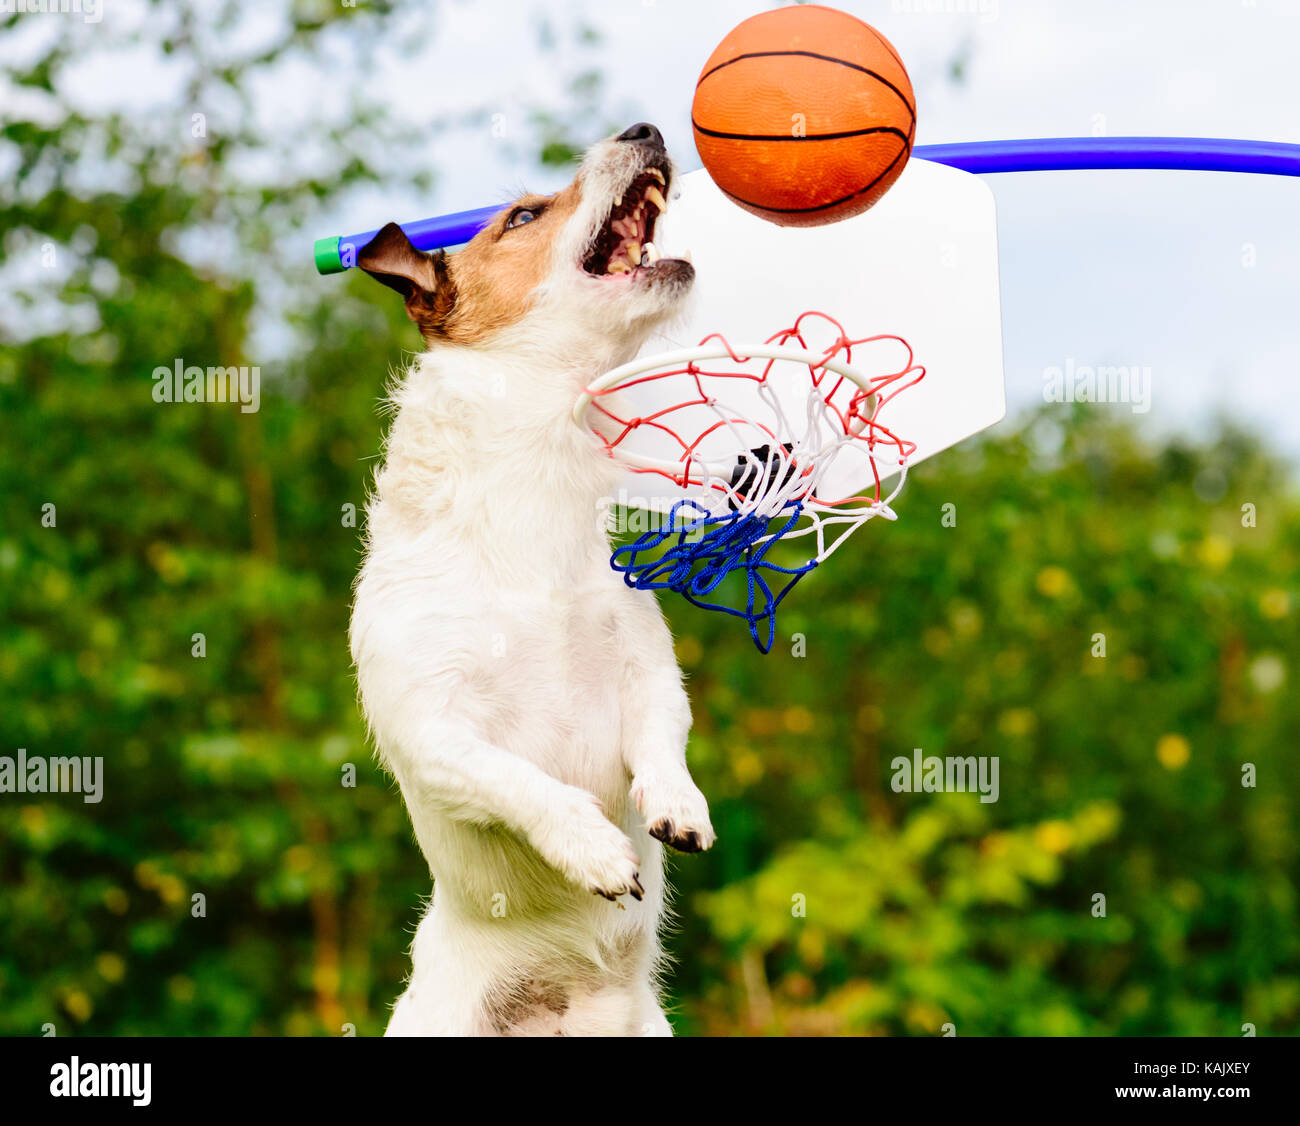 Fantasy basketball one-on-one game at backyard court Stock Photo